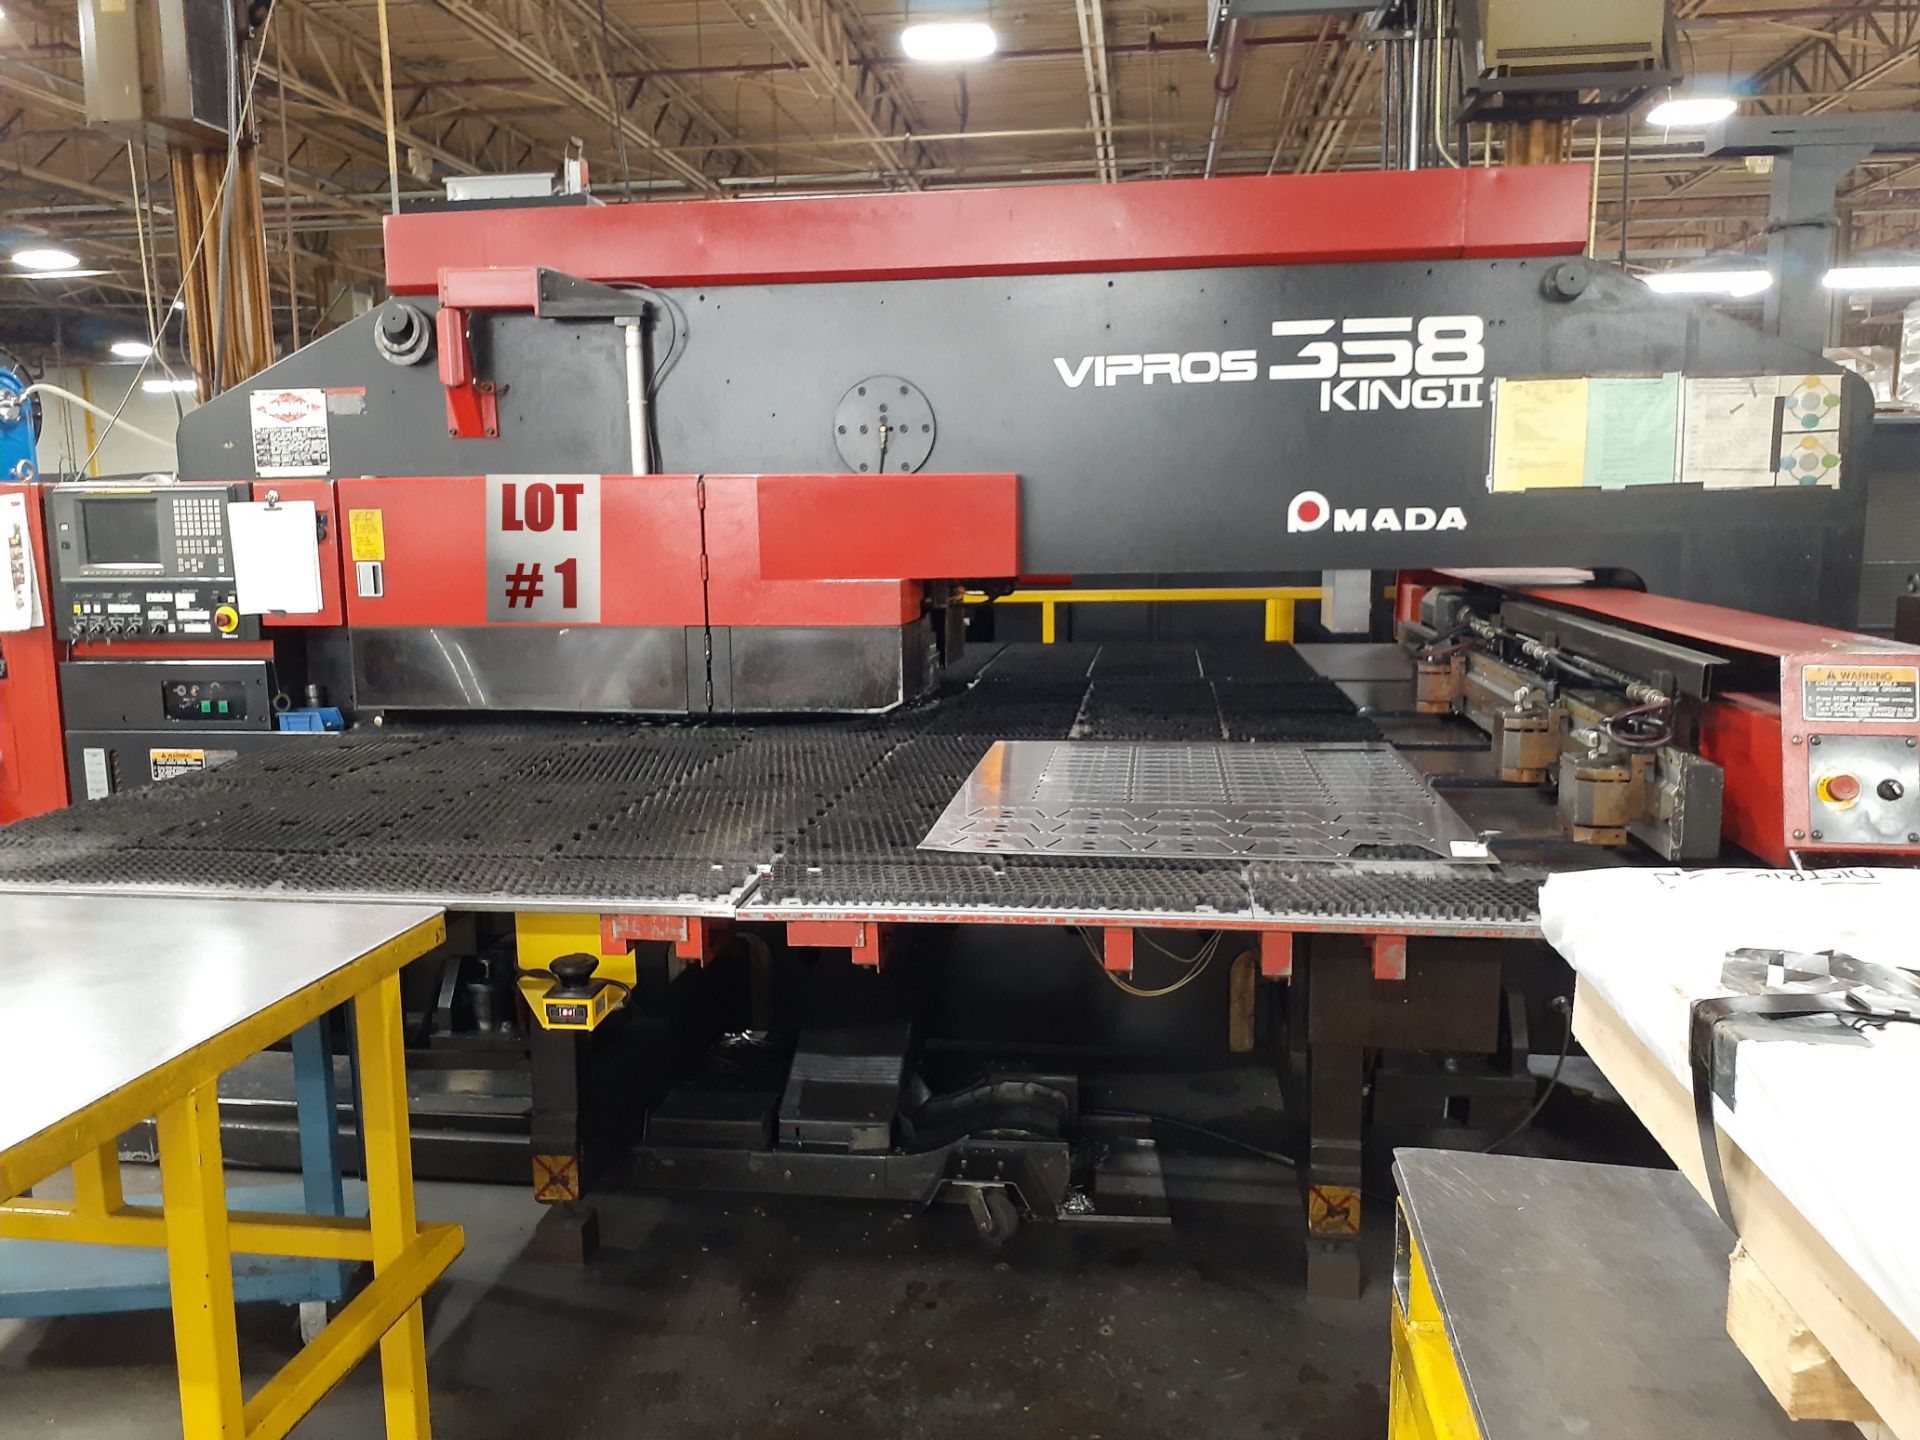 AMADA CNC TURRET PUNCH, MODEL VIPROS 358 KING II, 30 TON, 58 STATION - LOCATION - MONTREAL, QUEBEC